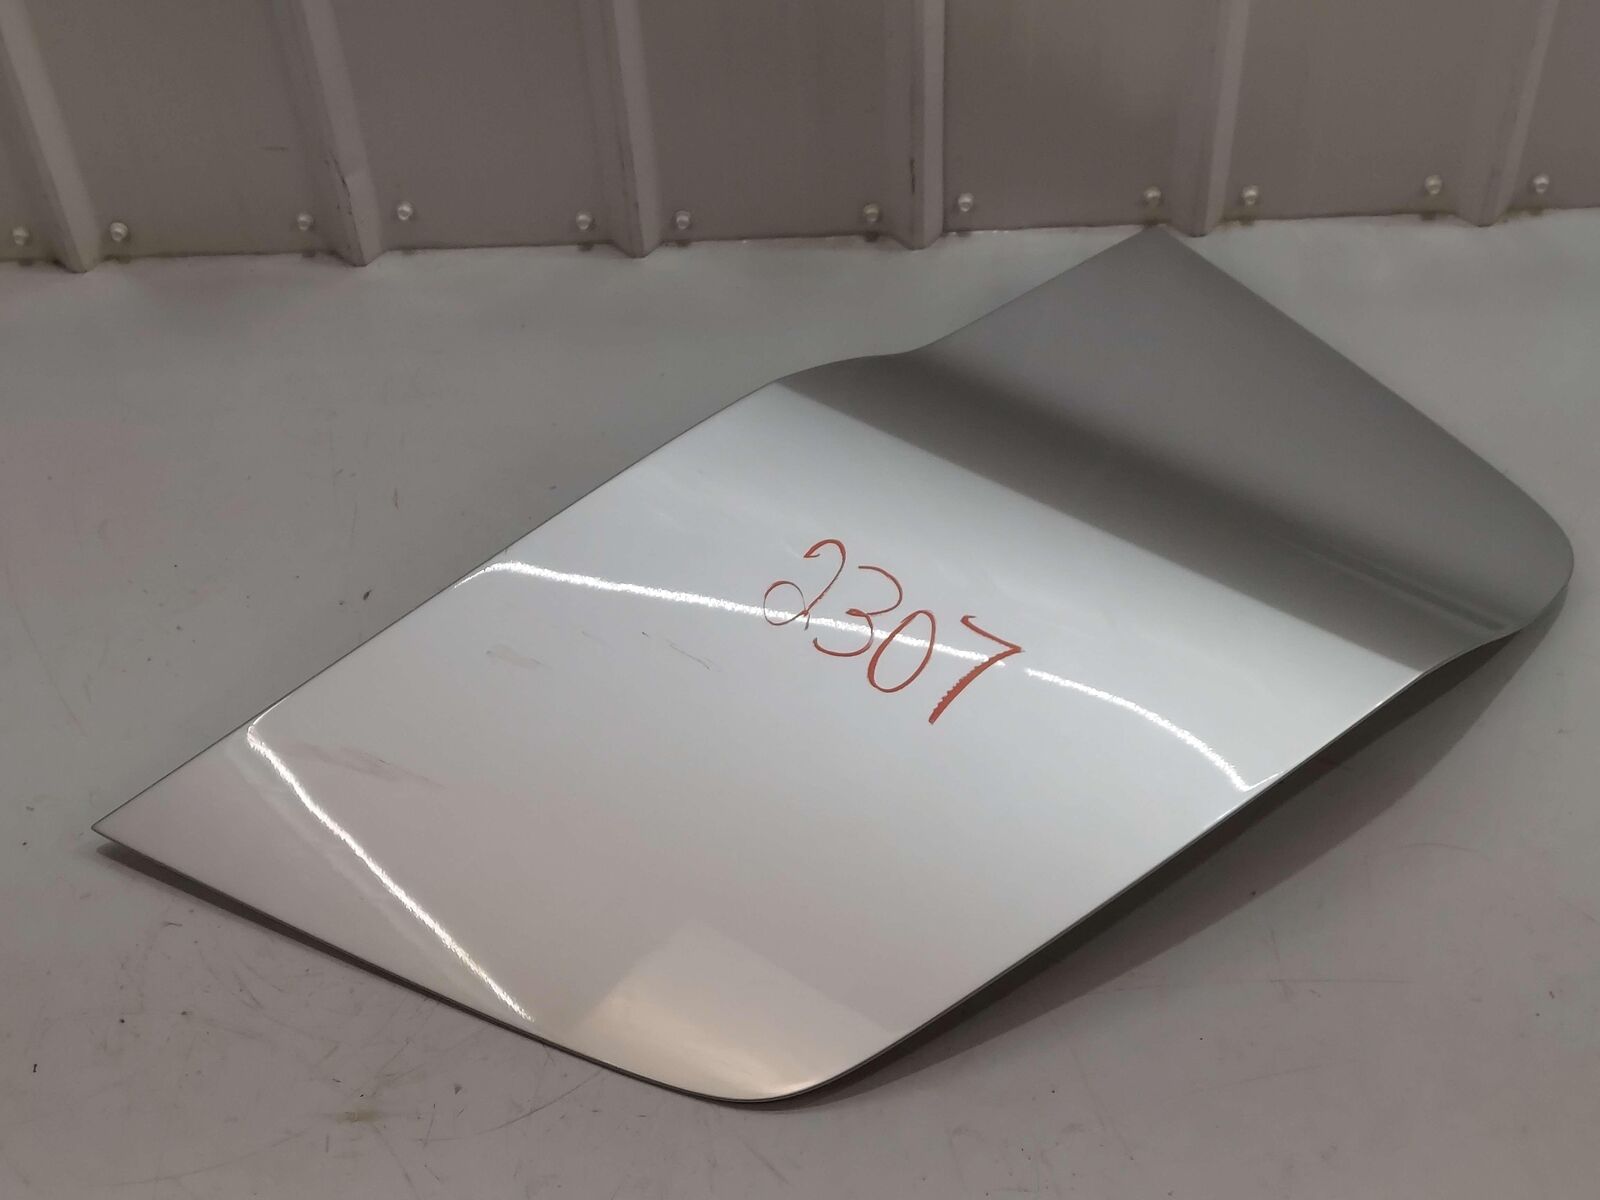 08-15 Audi R8 LH Left Quarter Side Panel Painted Silver 420853337 *Scuffed*